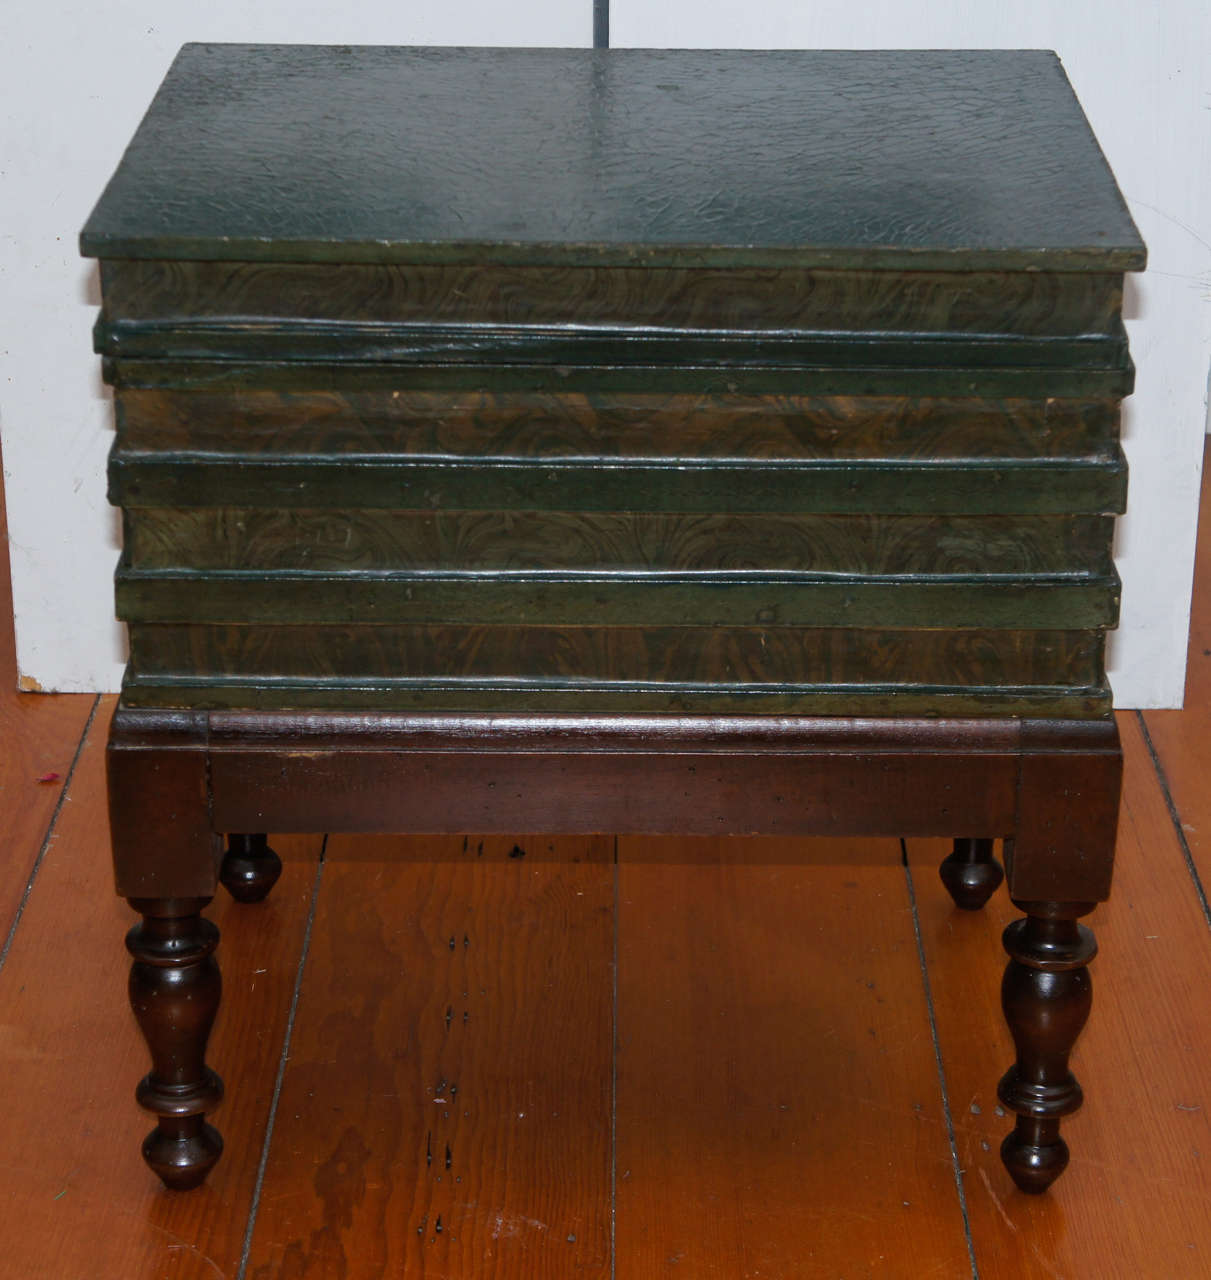 Victorian painted low table, bible box, in the form of a stack of four books. Raised on turned legs with a welled yellow painted interior, fitted with one
short drawer or interior storage compartment.